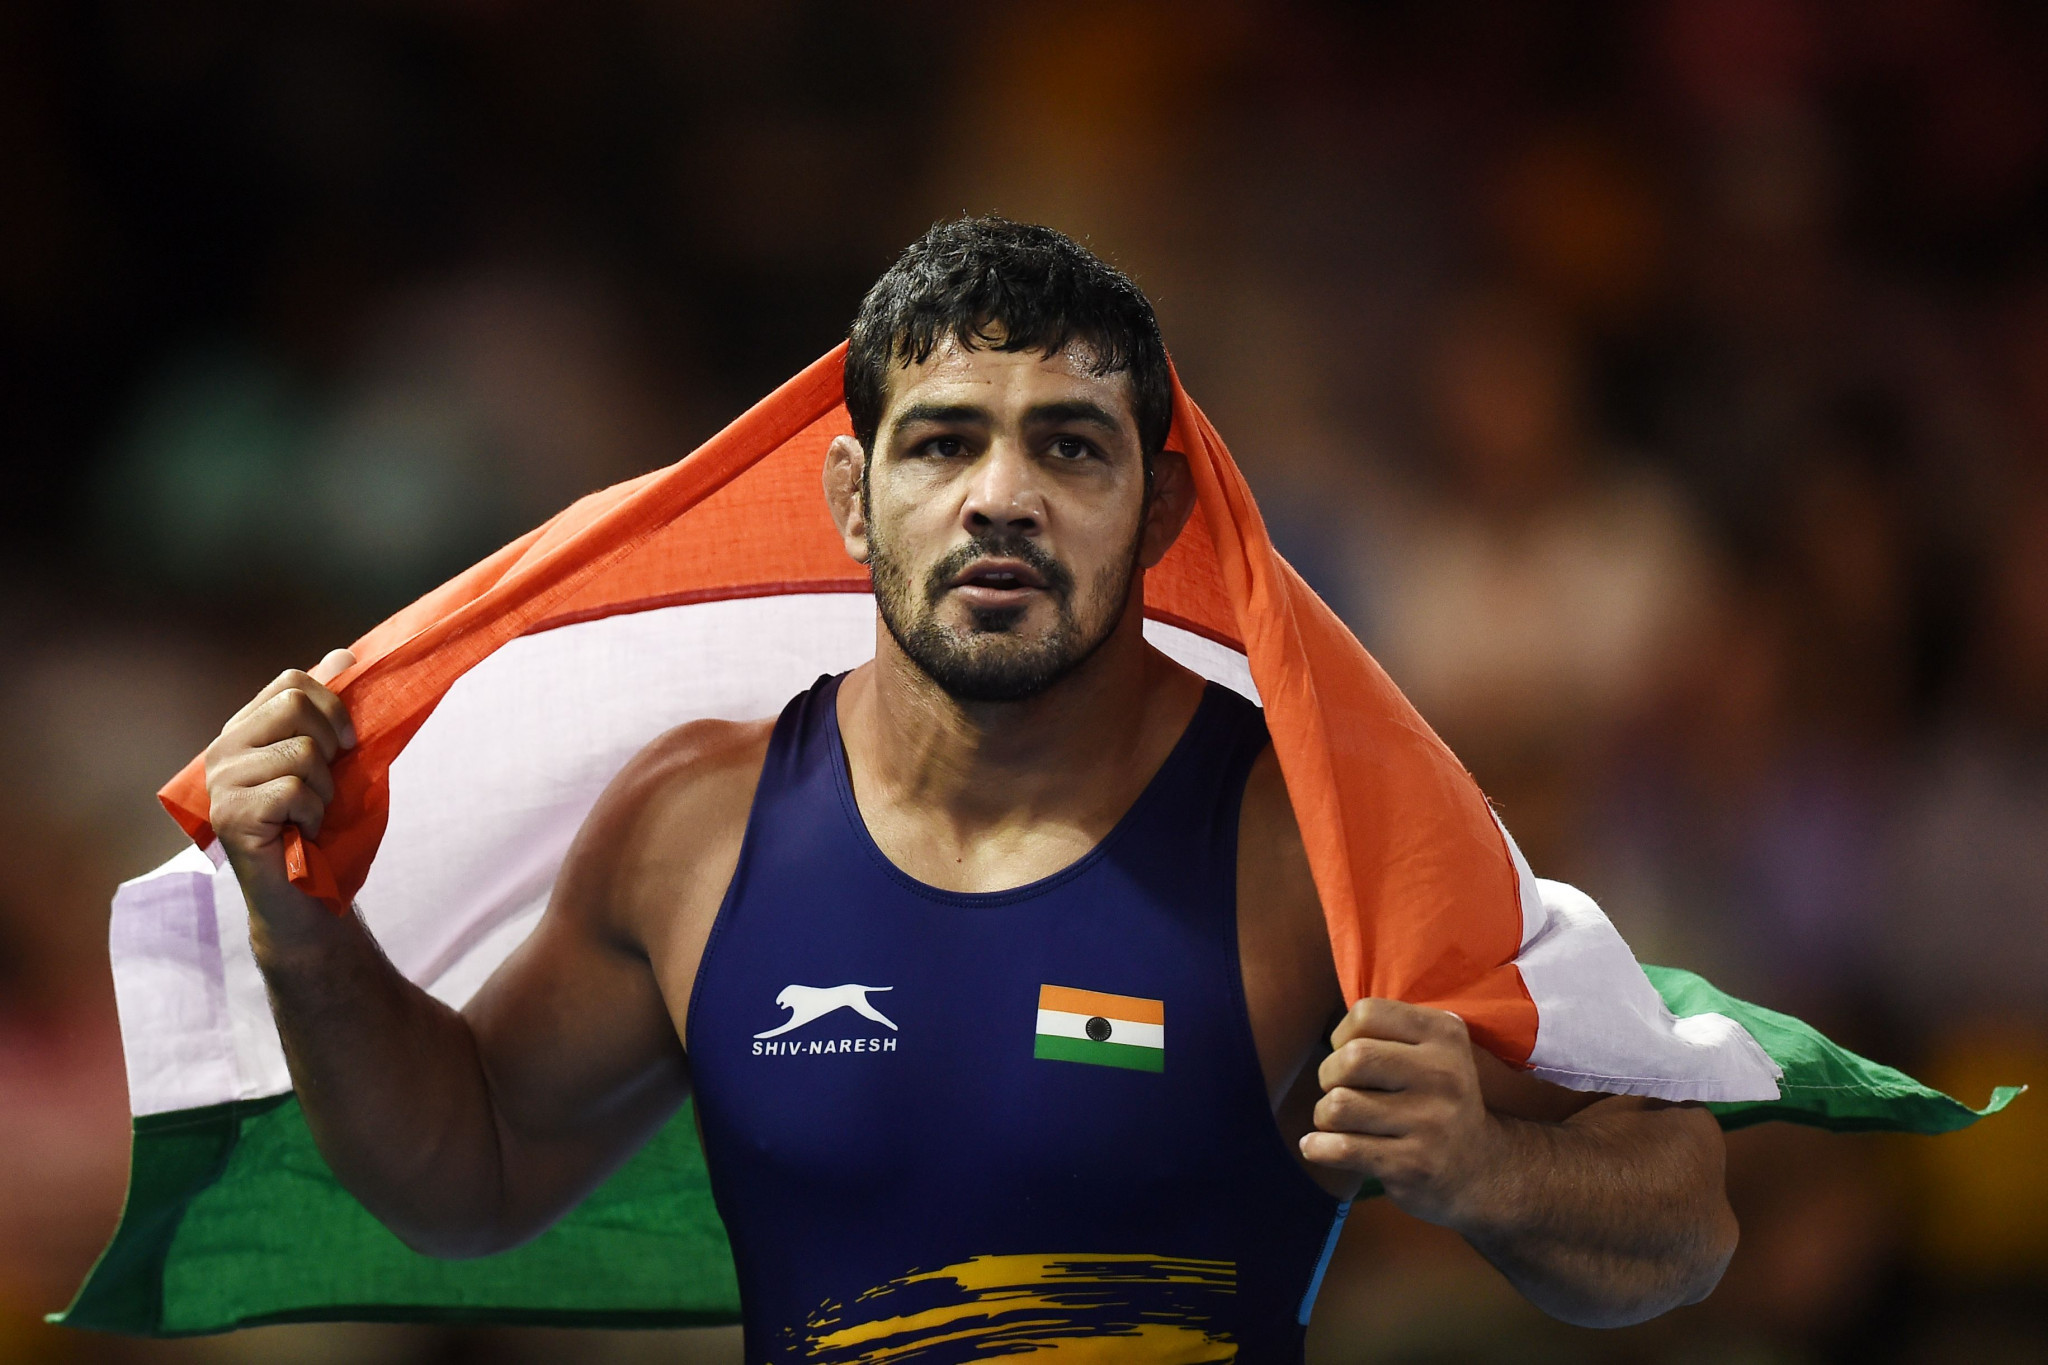 Kumar and Wiebe stake claims for greatness with Commonwealth Games wrestling victories at Gold Coast 2018 